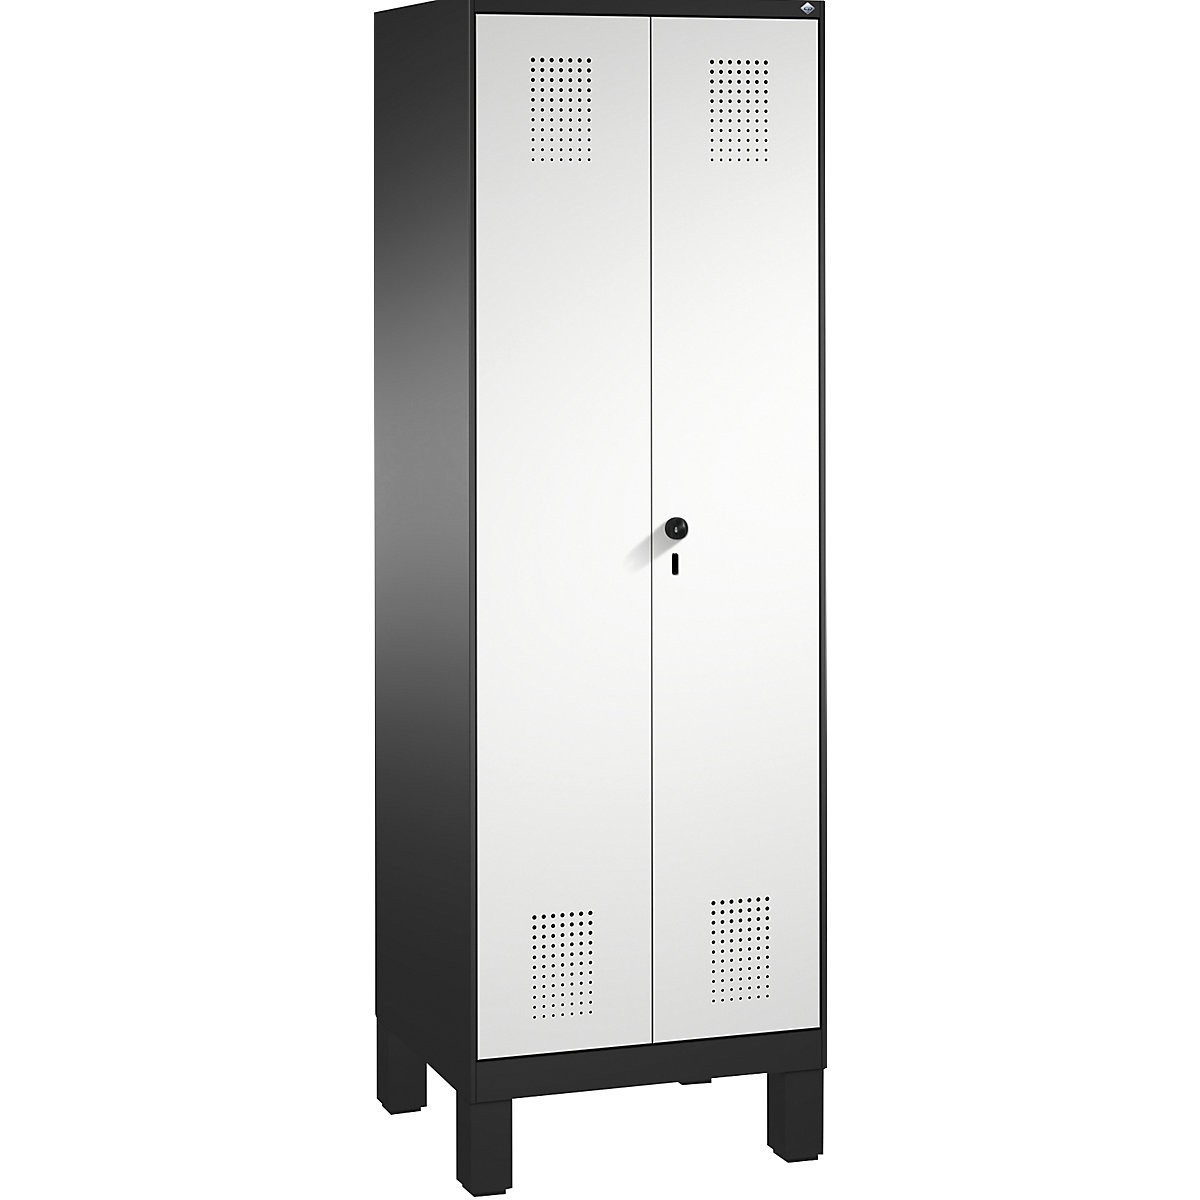 EVOLO storage cupboard, doors close in the middle, with feet – C+P, 2 compartments, 8 shelves, compartment width 300 mm, black grey / light grey